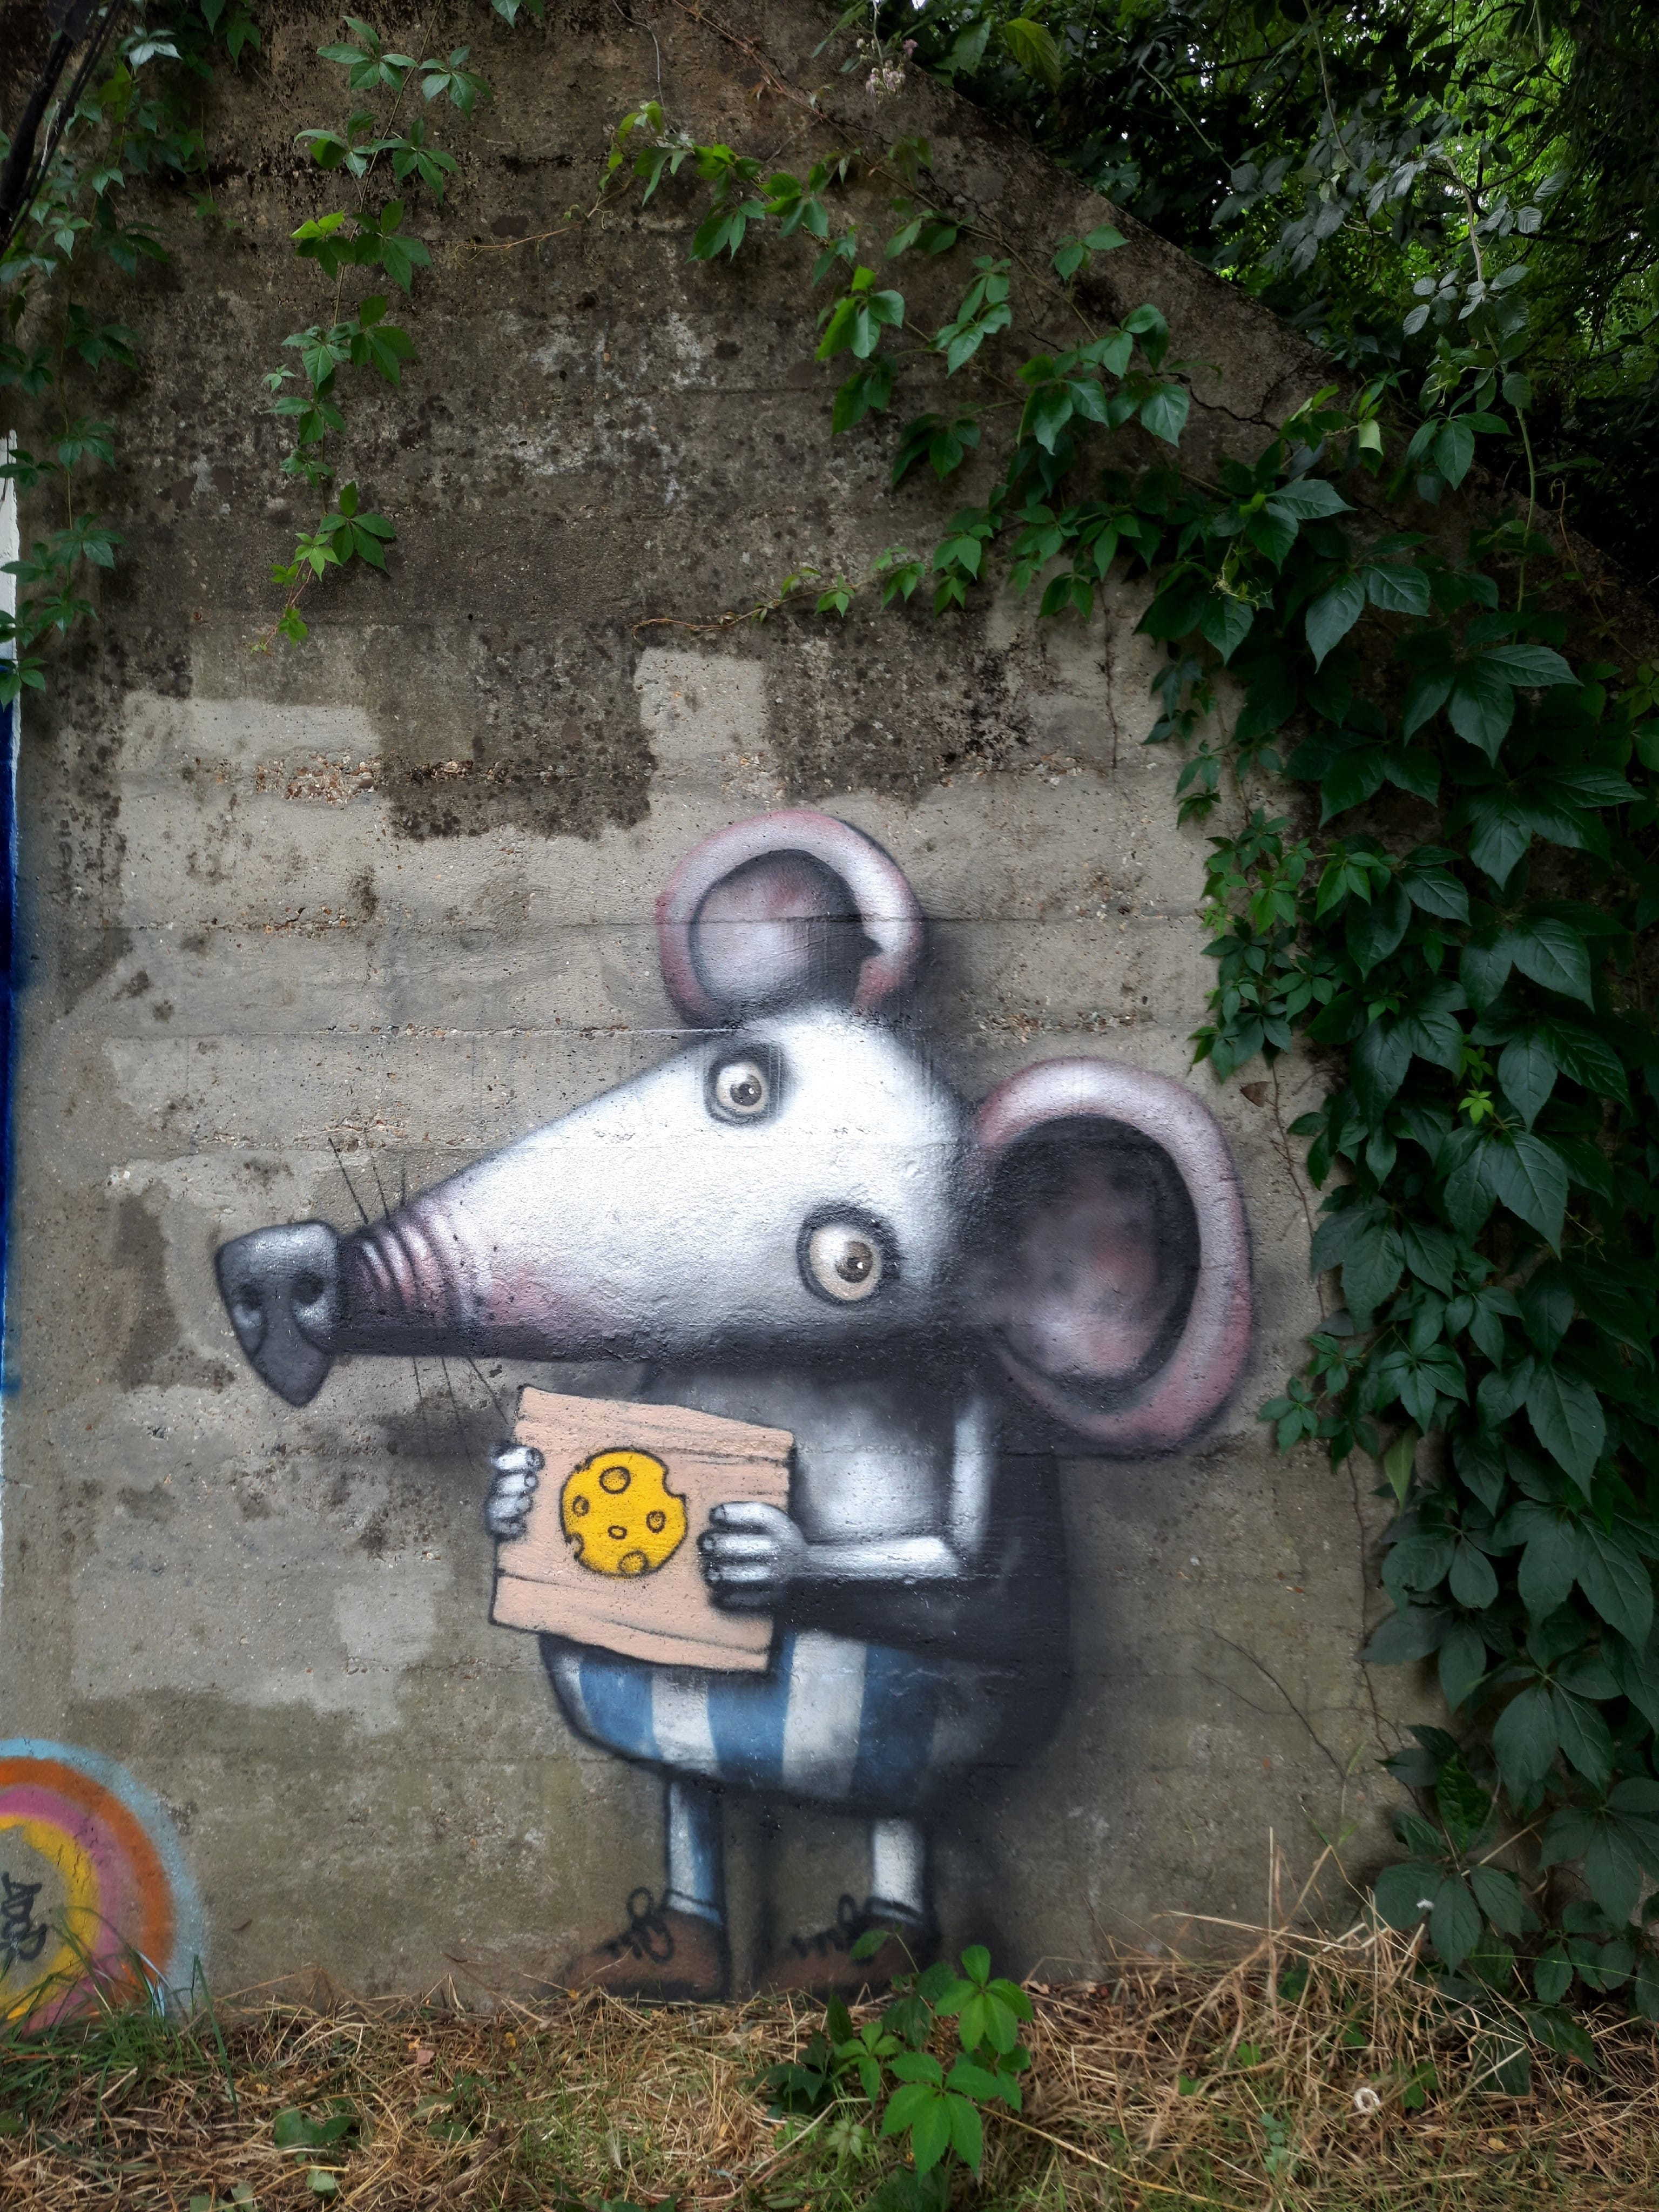 Graffiti 6448  by the artist Ador captured by Mephisroth in Le Mans France